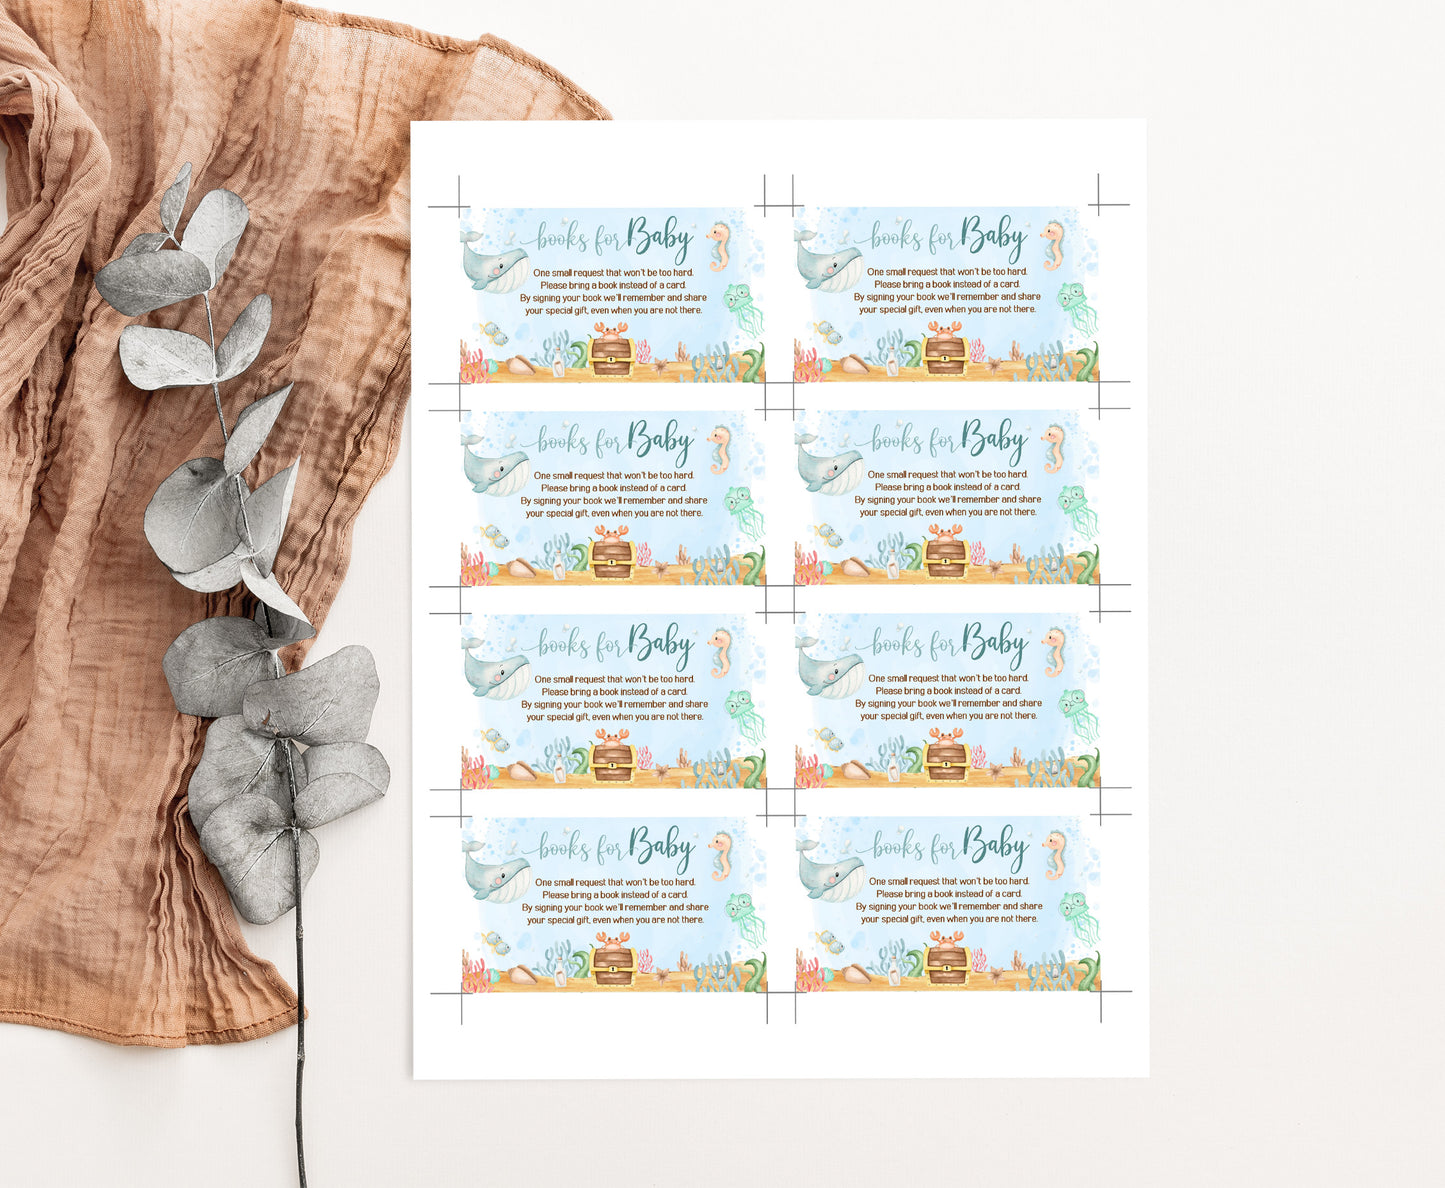 Under The Sea Books For Baby Request Card | Ocean Baby Shower Invitation insert - 44A